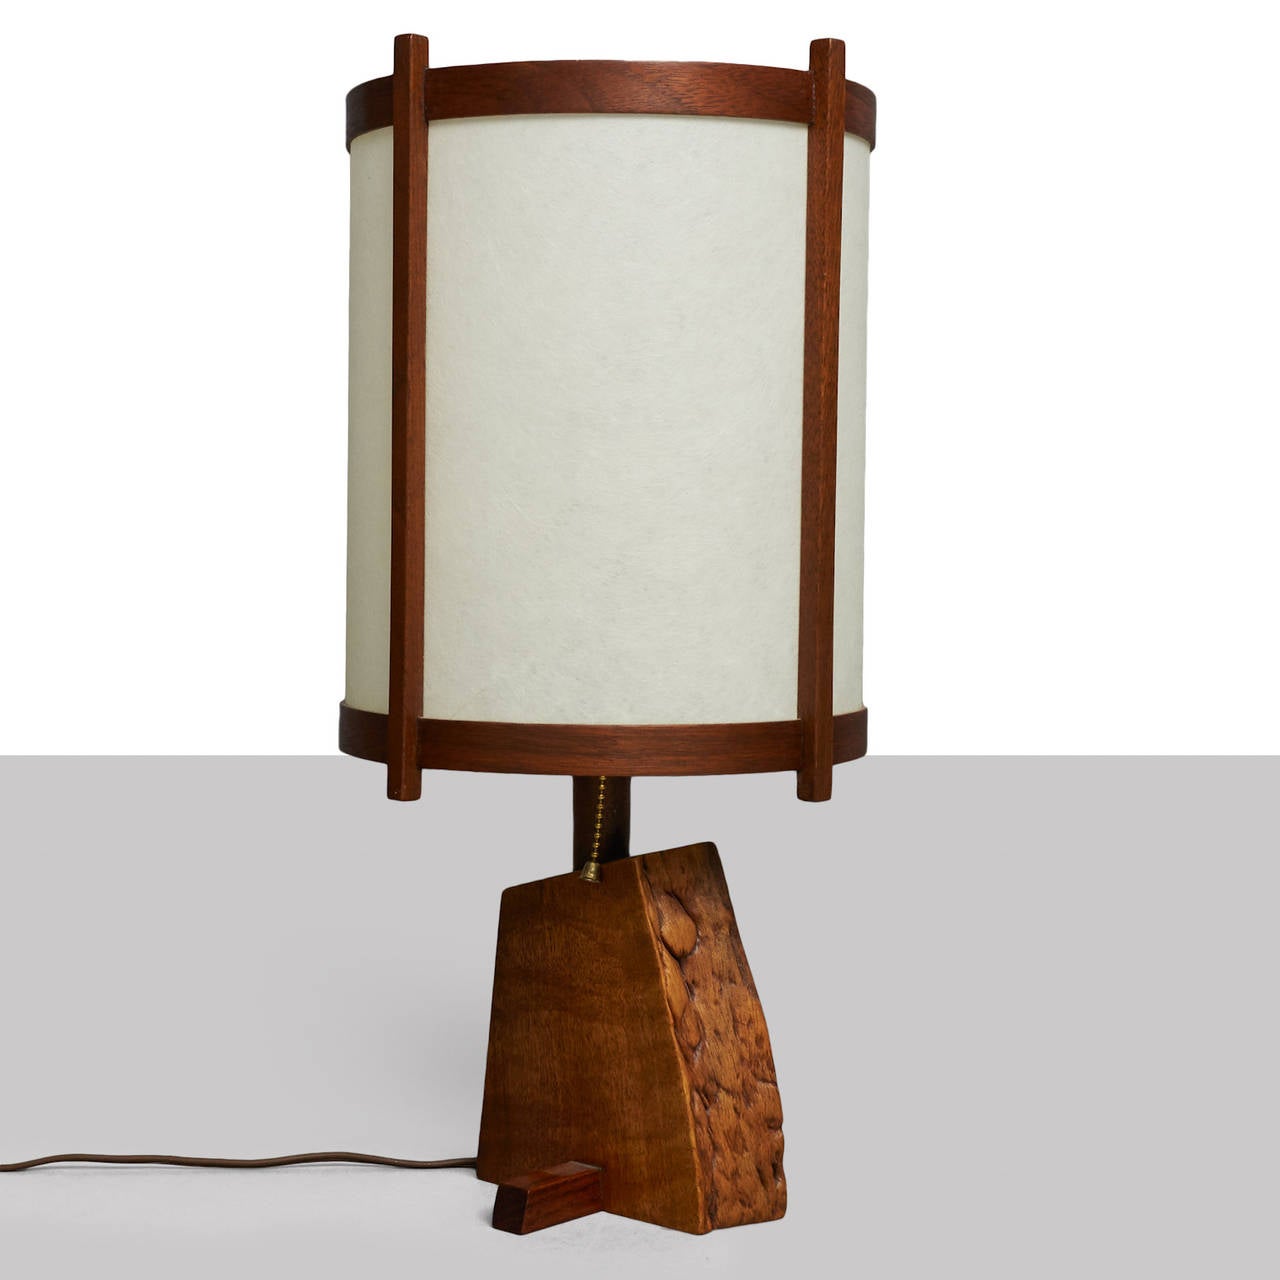 A walnut and rosewood lamp by George Nakashima with its original shade.